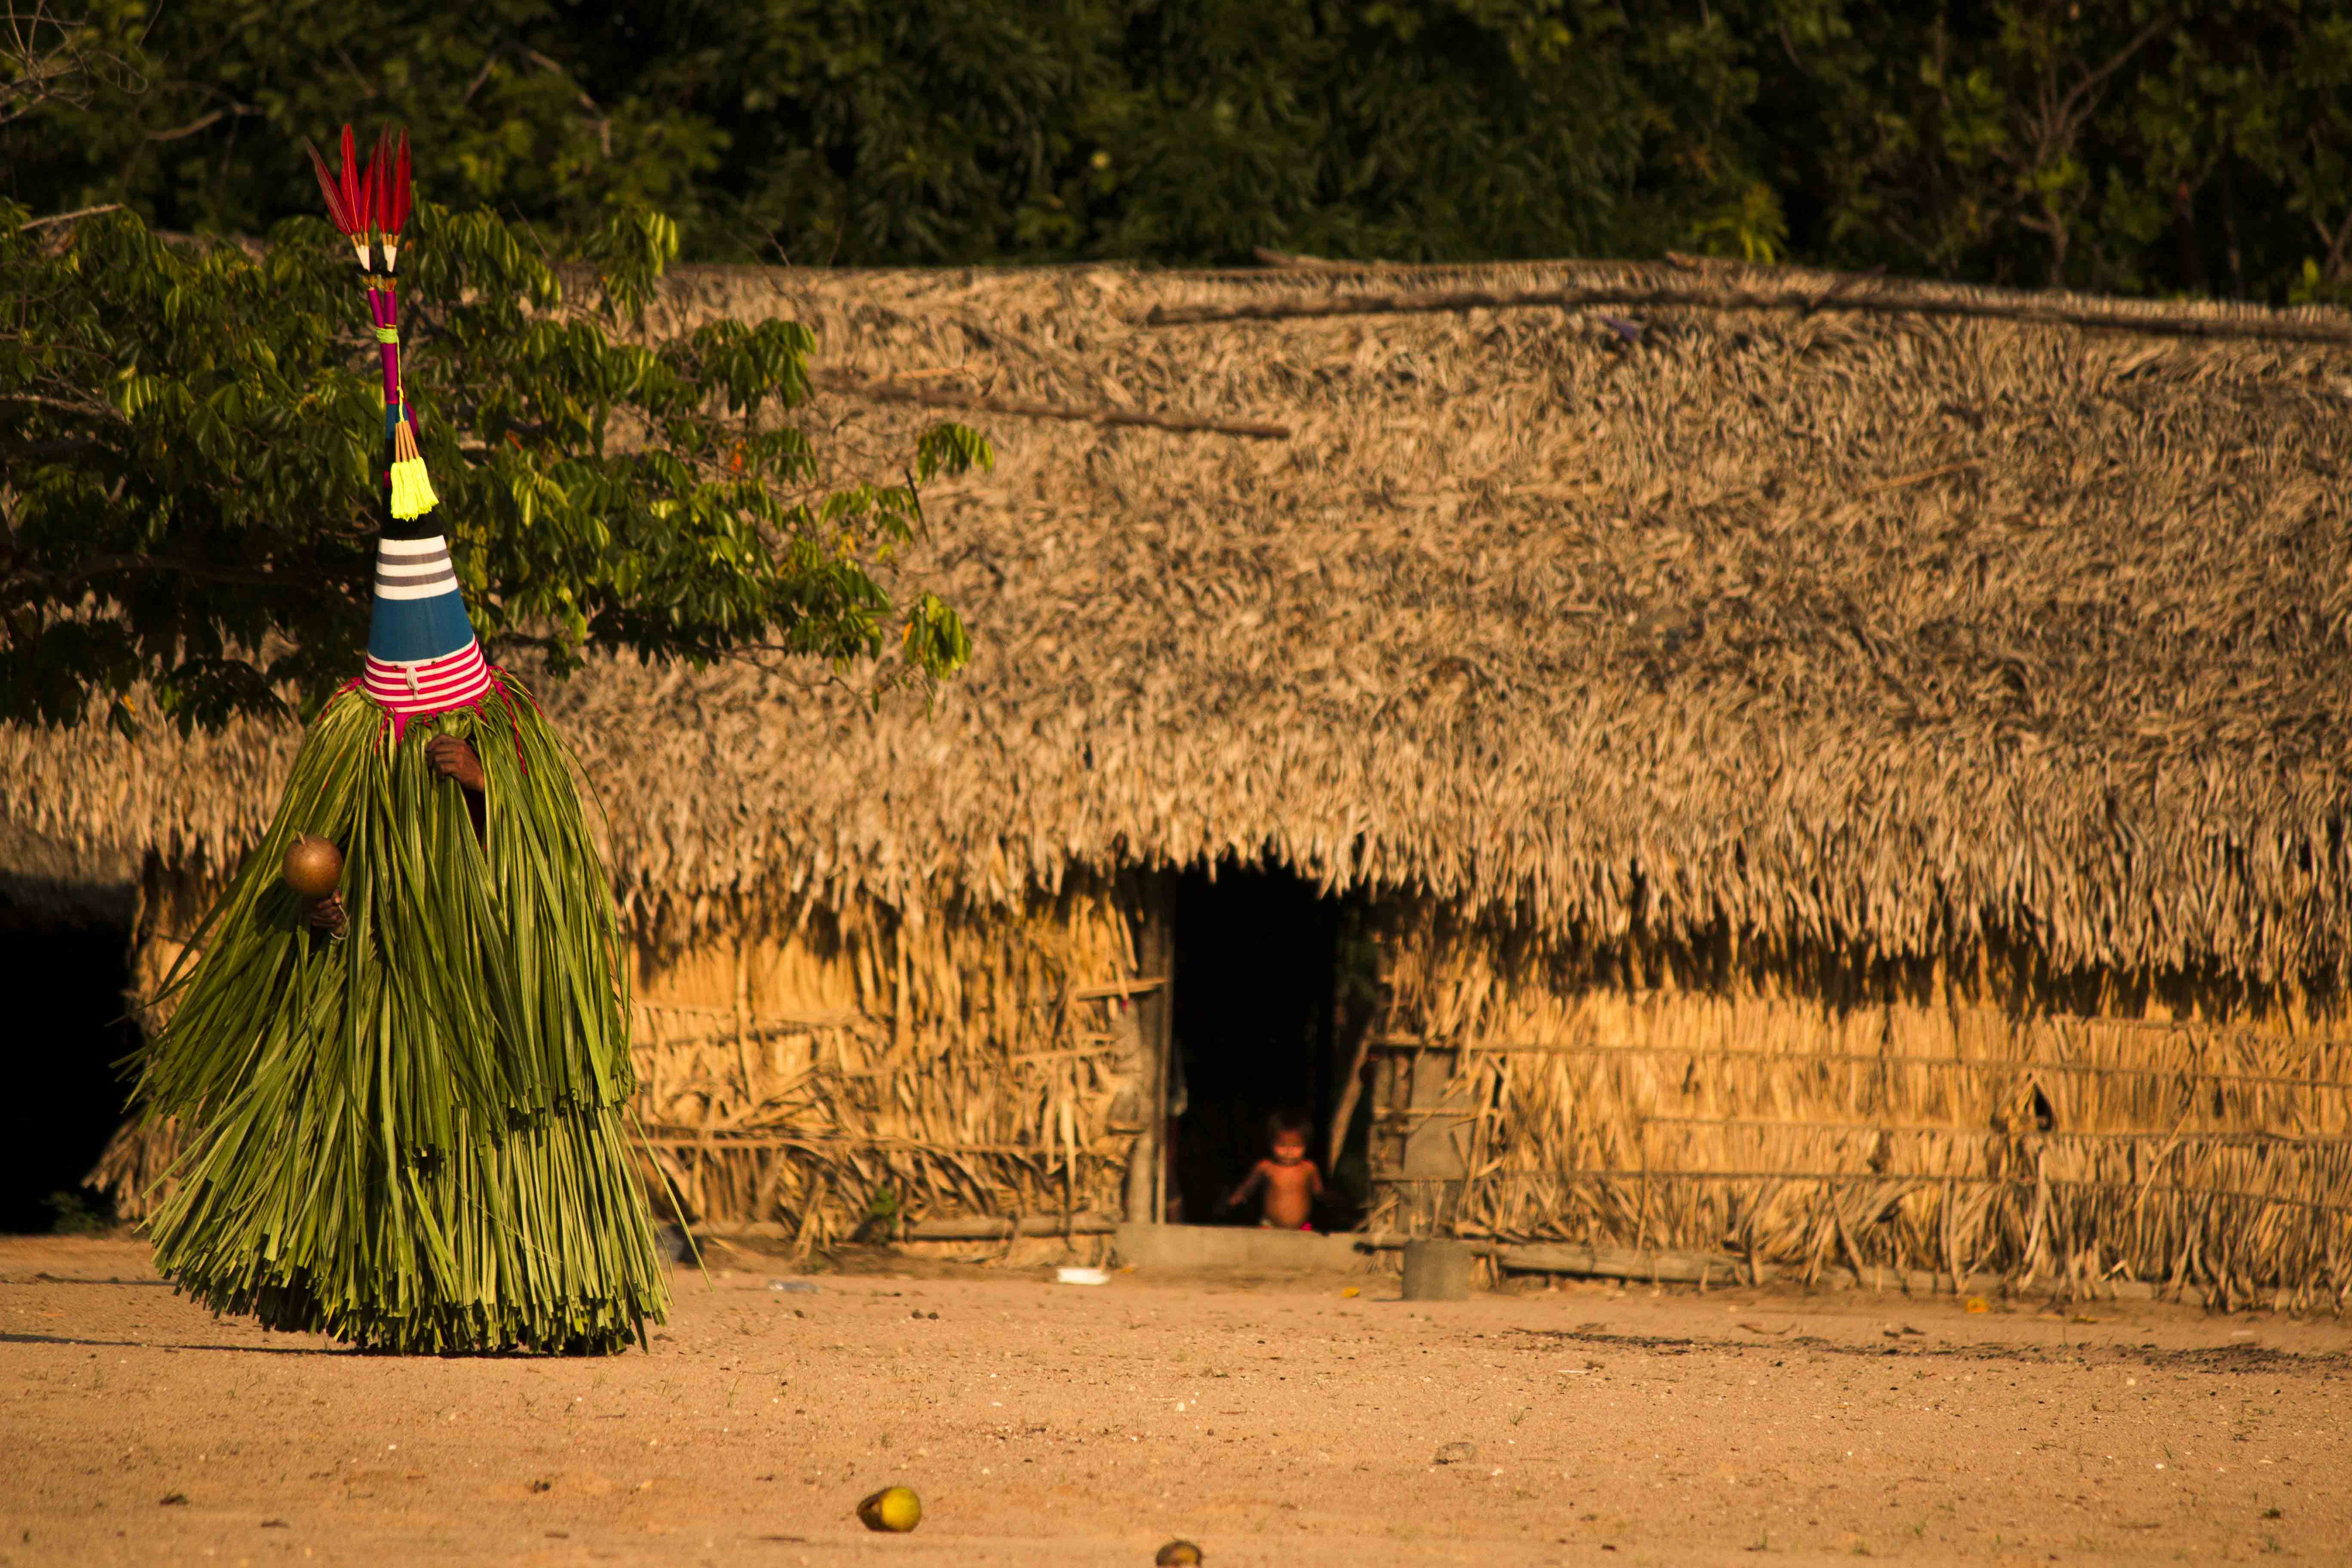 A man performs a traditional dance, while a young child stands at the doorstep, unaware of what is happening.